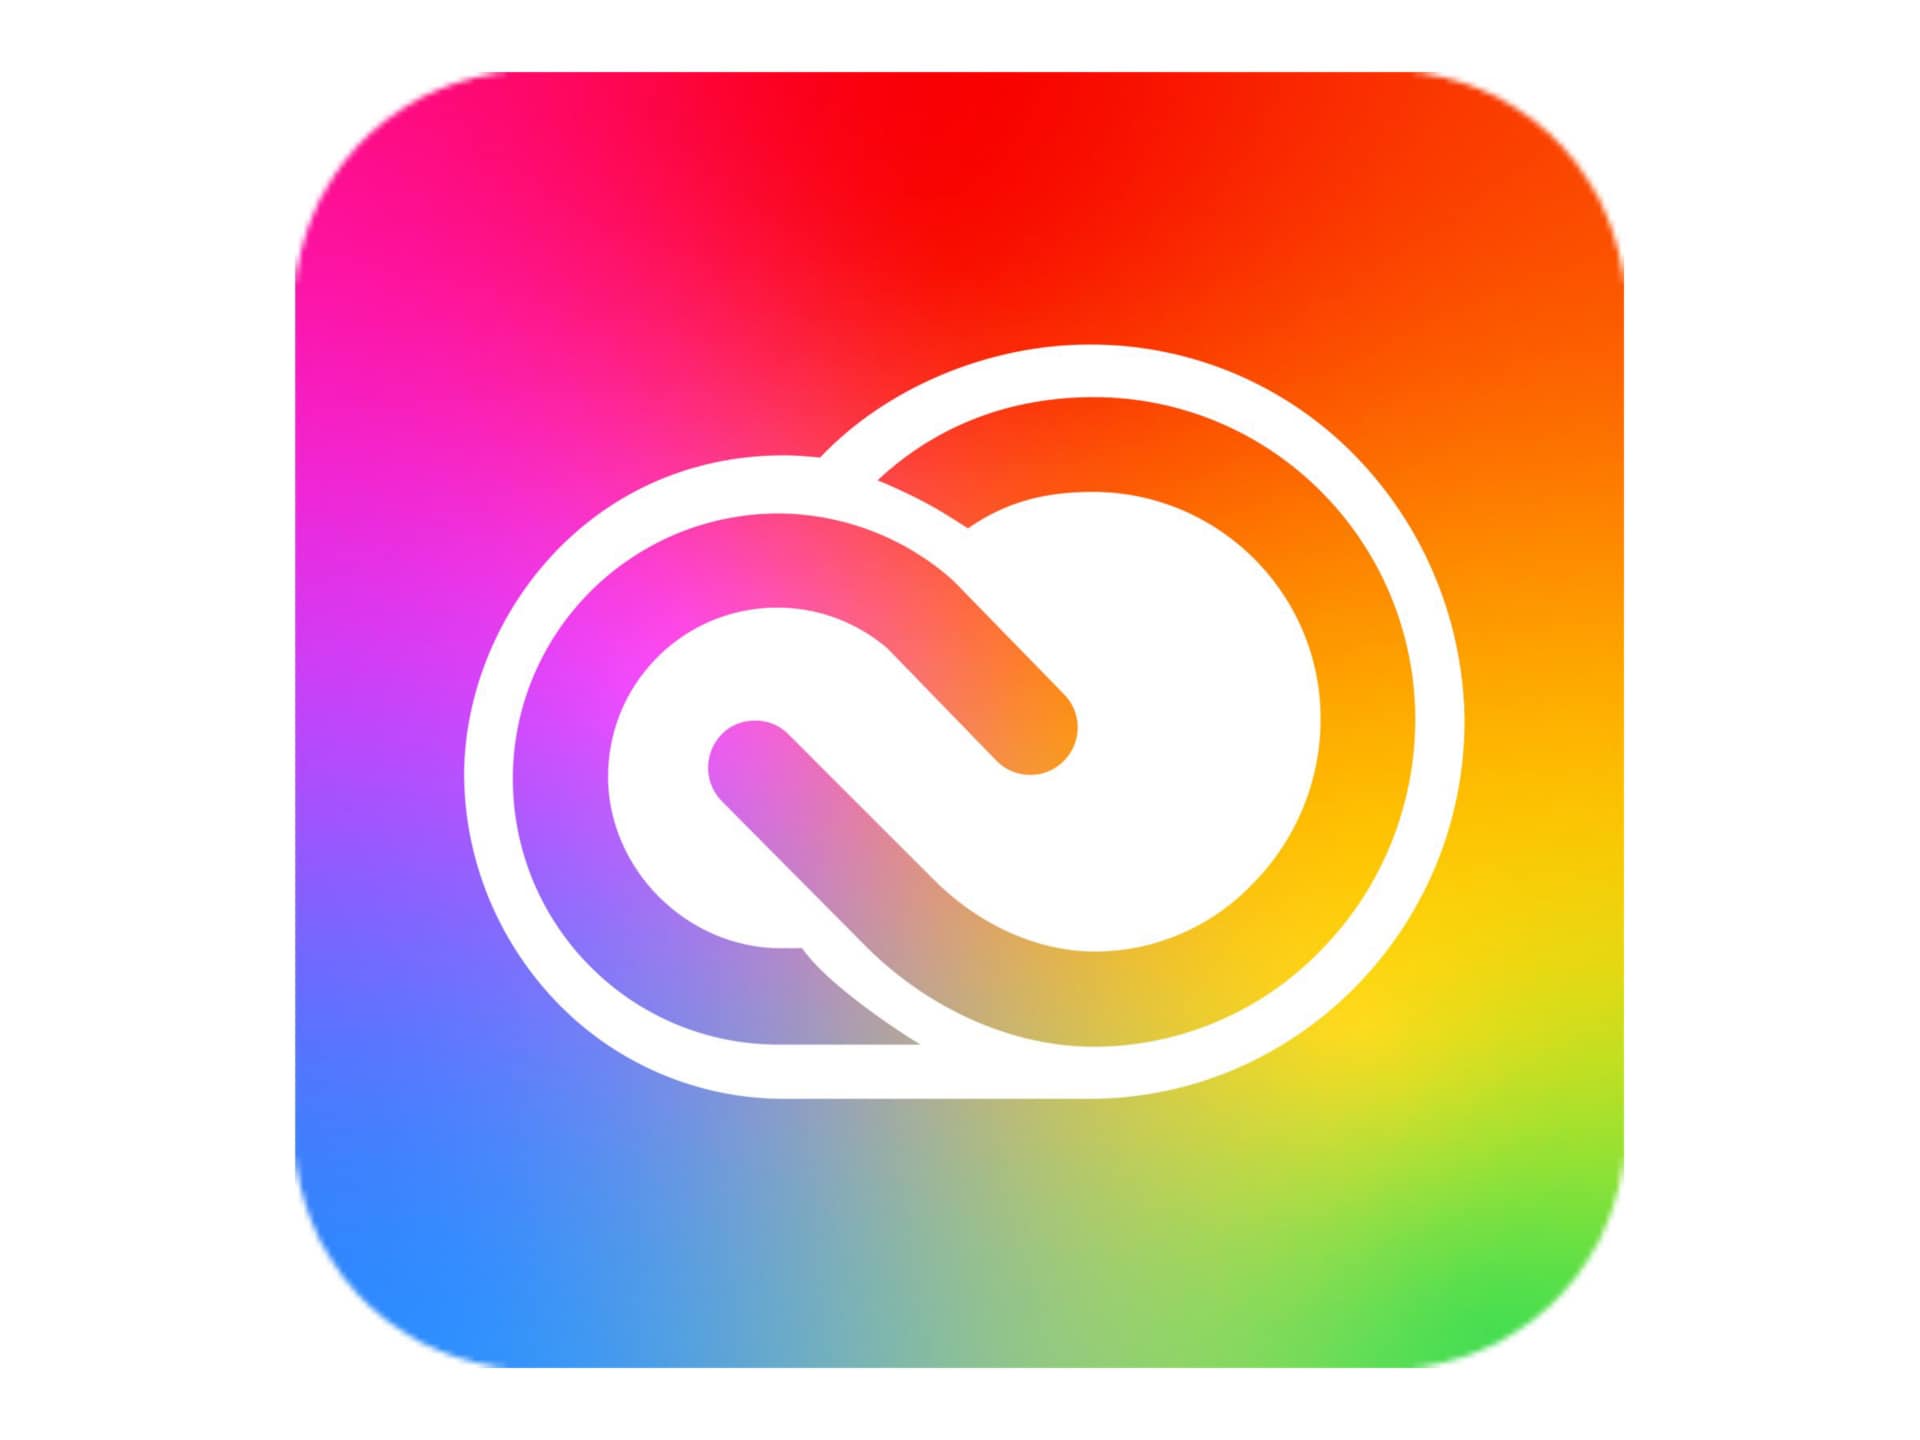 Adobe Creative Cloud for Enterprise - All Apps - Subscription New (13 months) - 1 named user